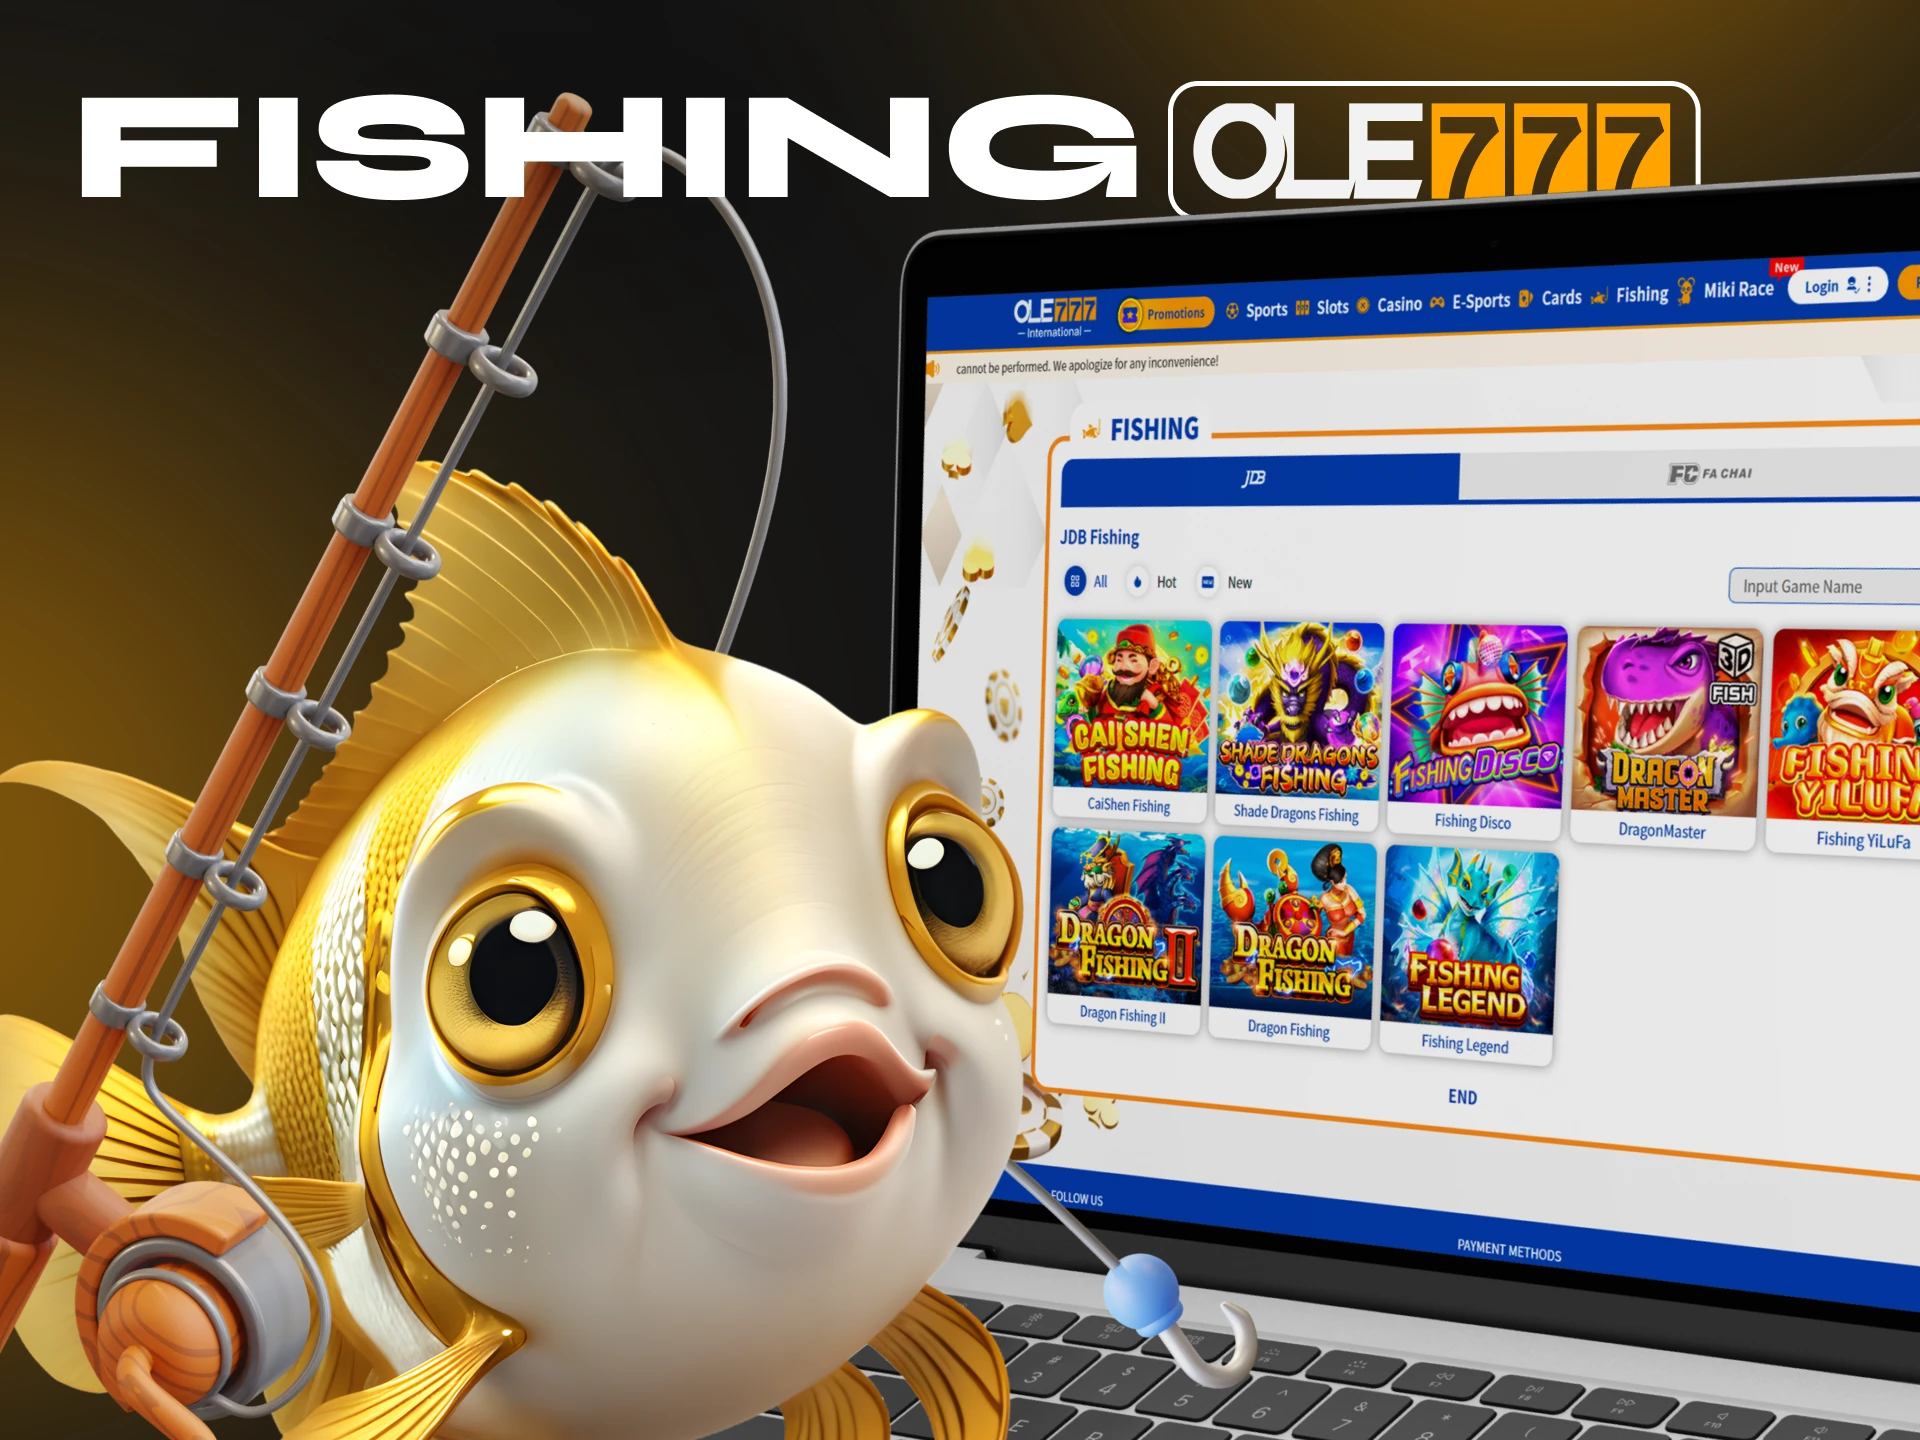 You don't need a specific strategy to play fishing at Ole777 casino, just relax and play.